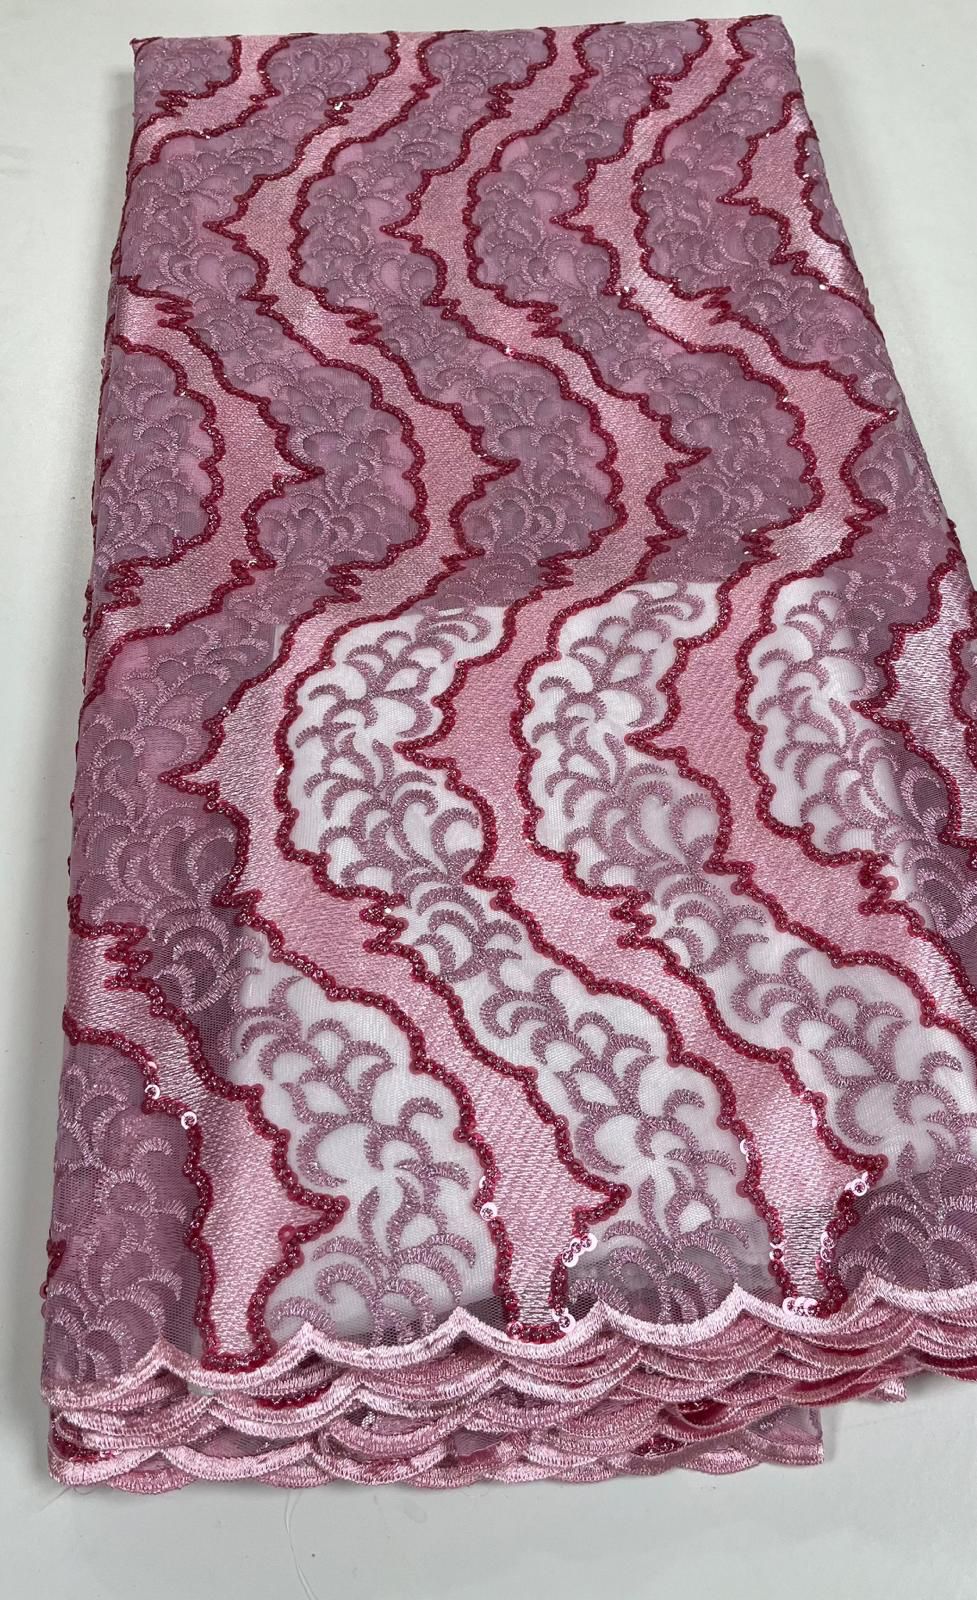 Onion Pink French Lace - 5 Yards